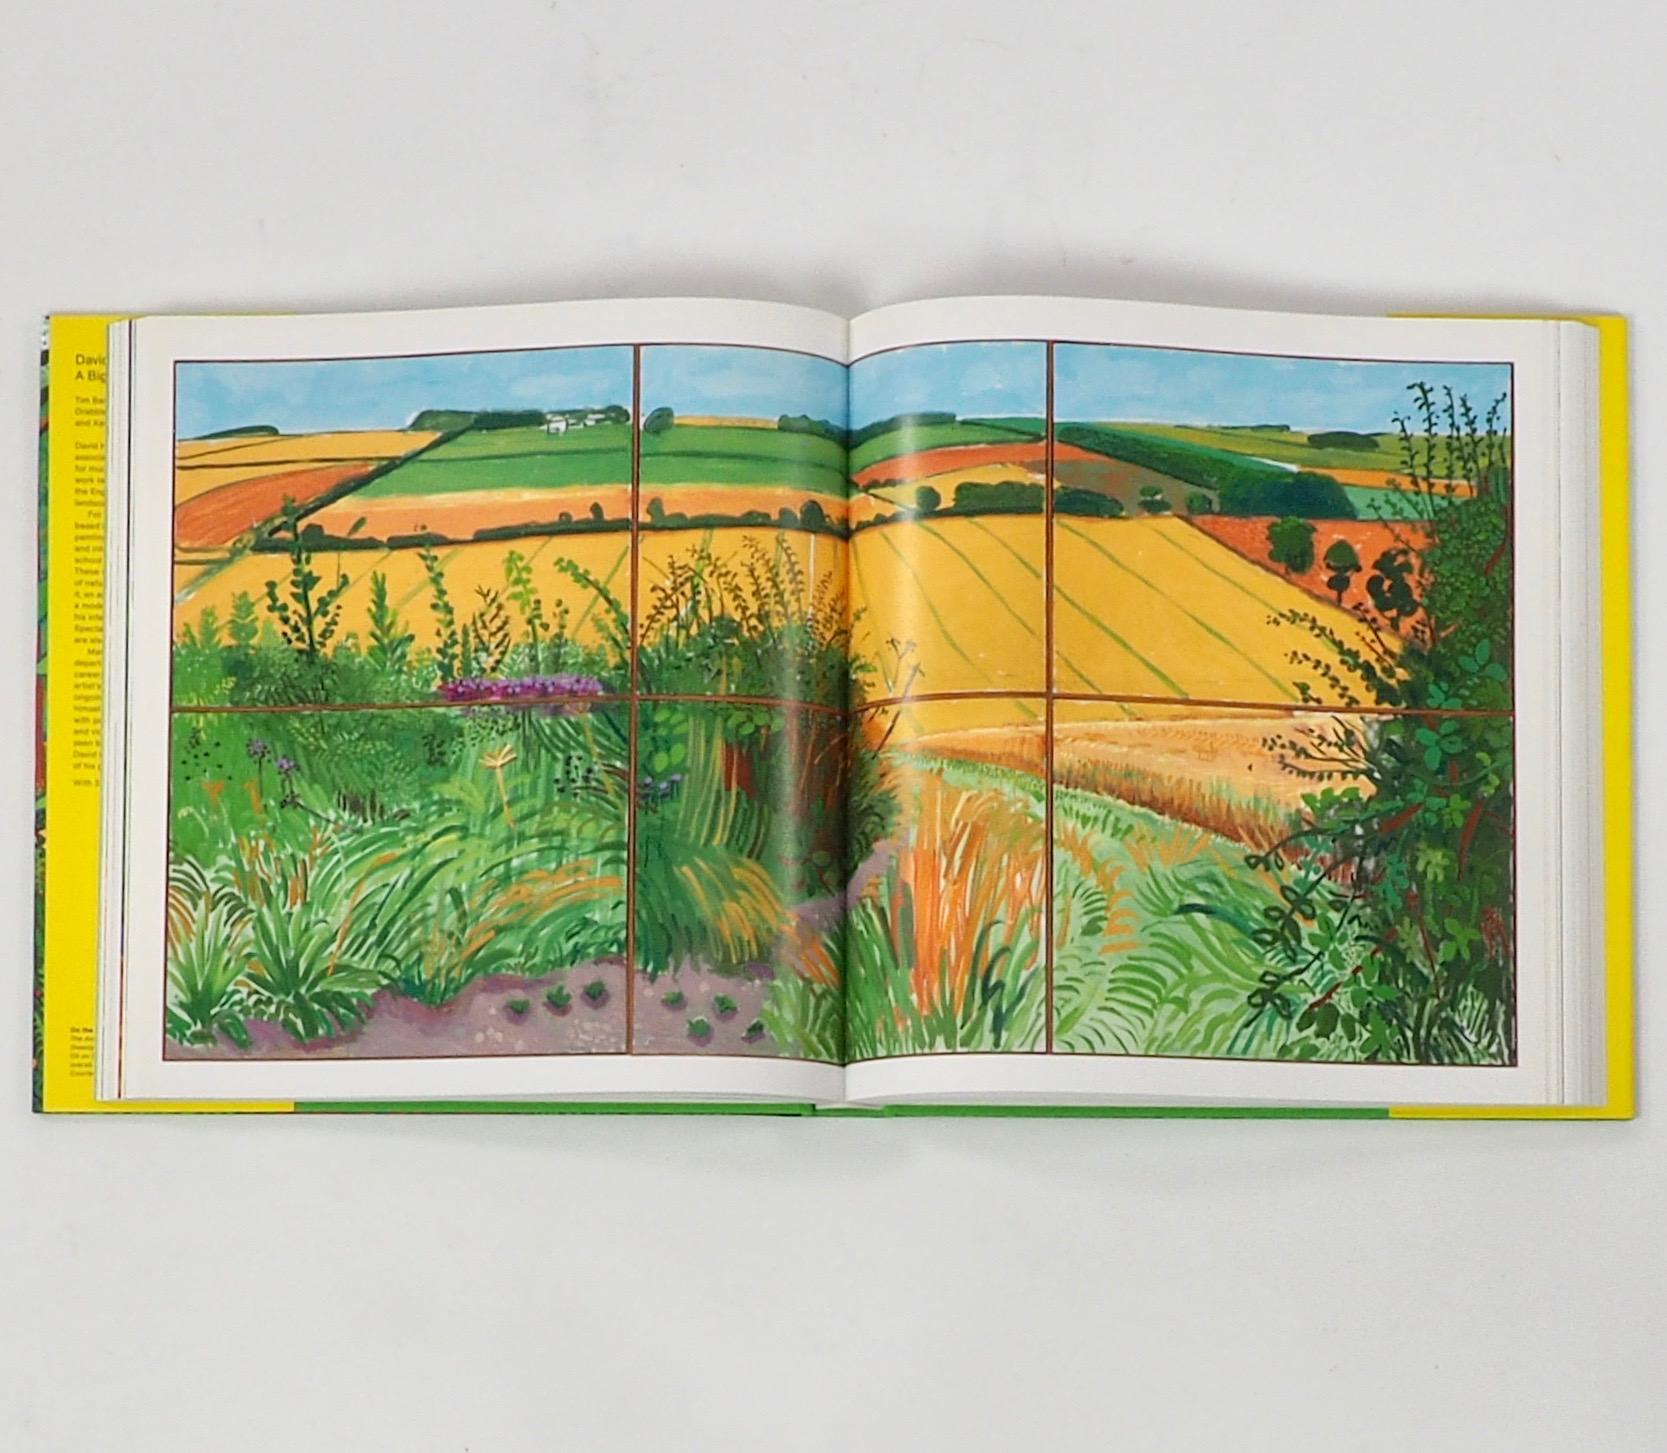 David Hockney. A Bigger Picture. Published by Thames and Hudson, London 2012. First edition.
 
This major work, now rare and out of print, 'redefines Hockney as an important painter of the English countryside, presenting his recent landscapes for